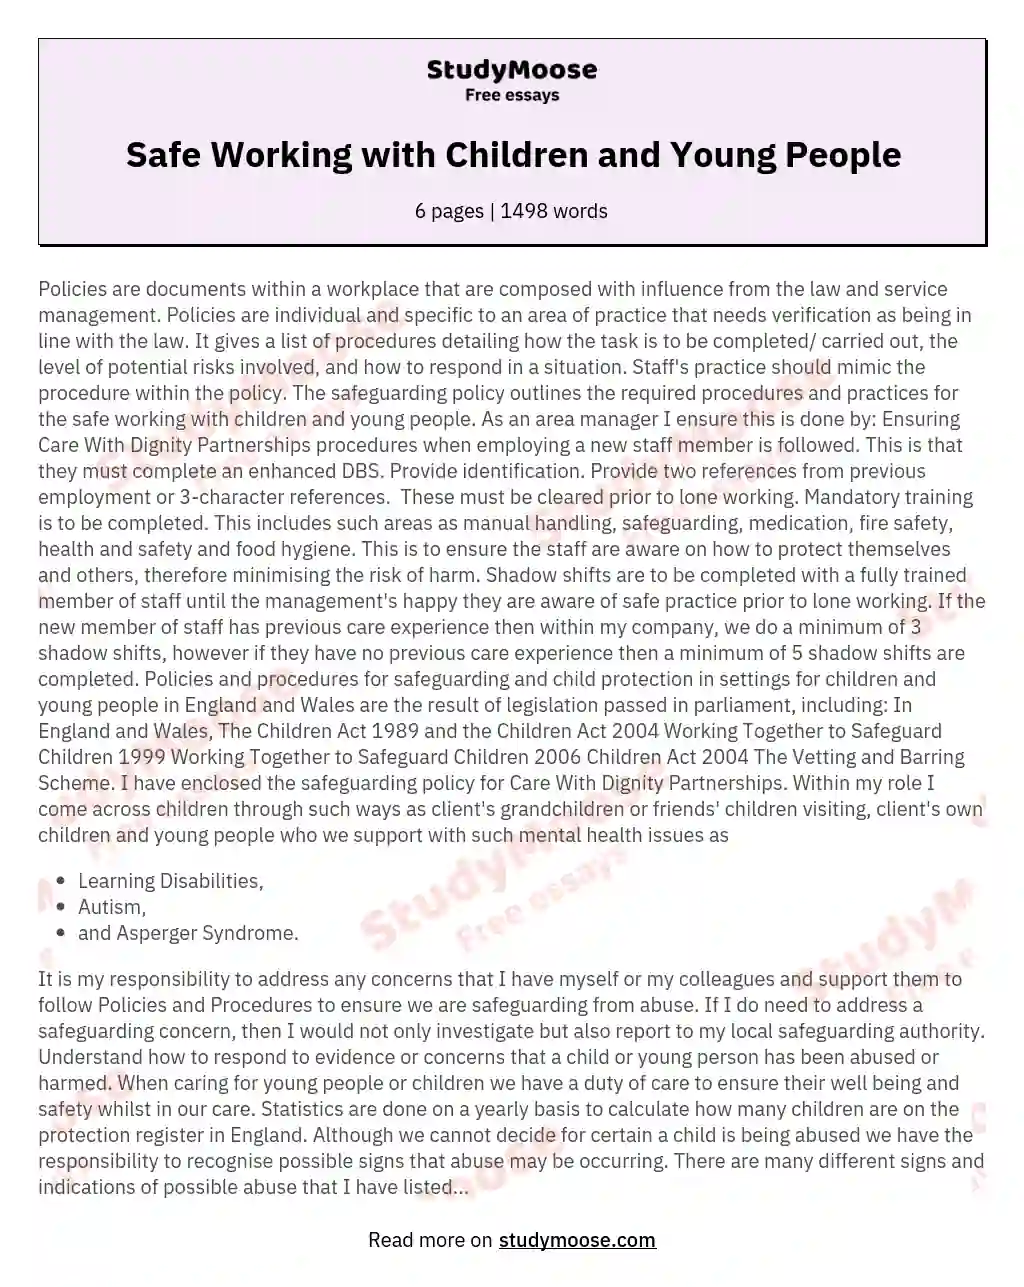 Safe Working with Children and Young People